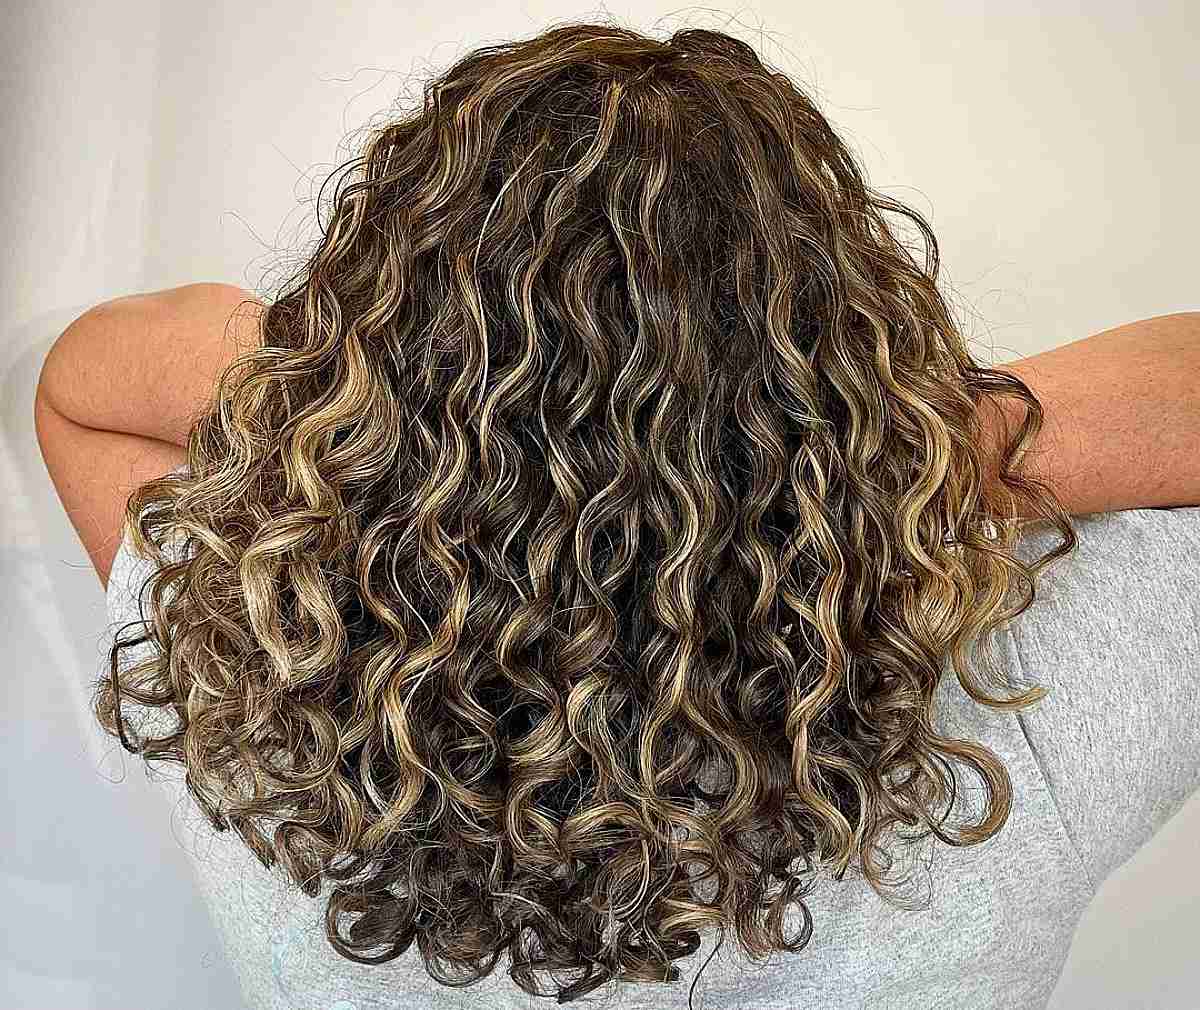 Partial Blonde Balayage Highlights on Soft Curly Hair